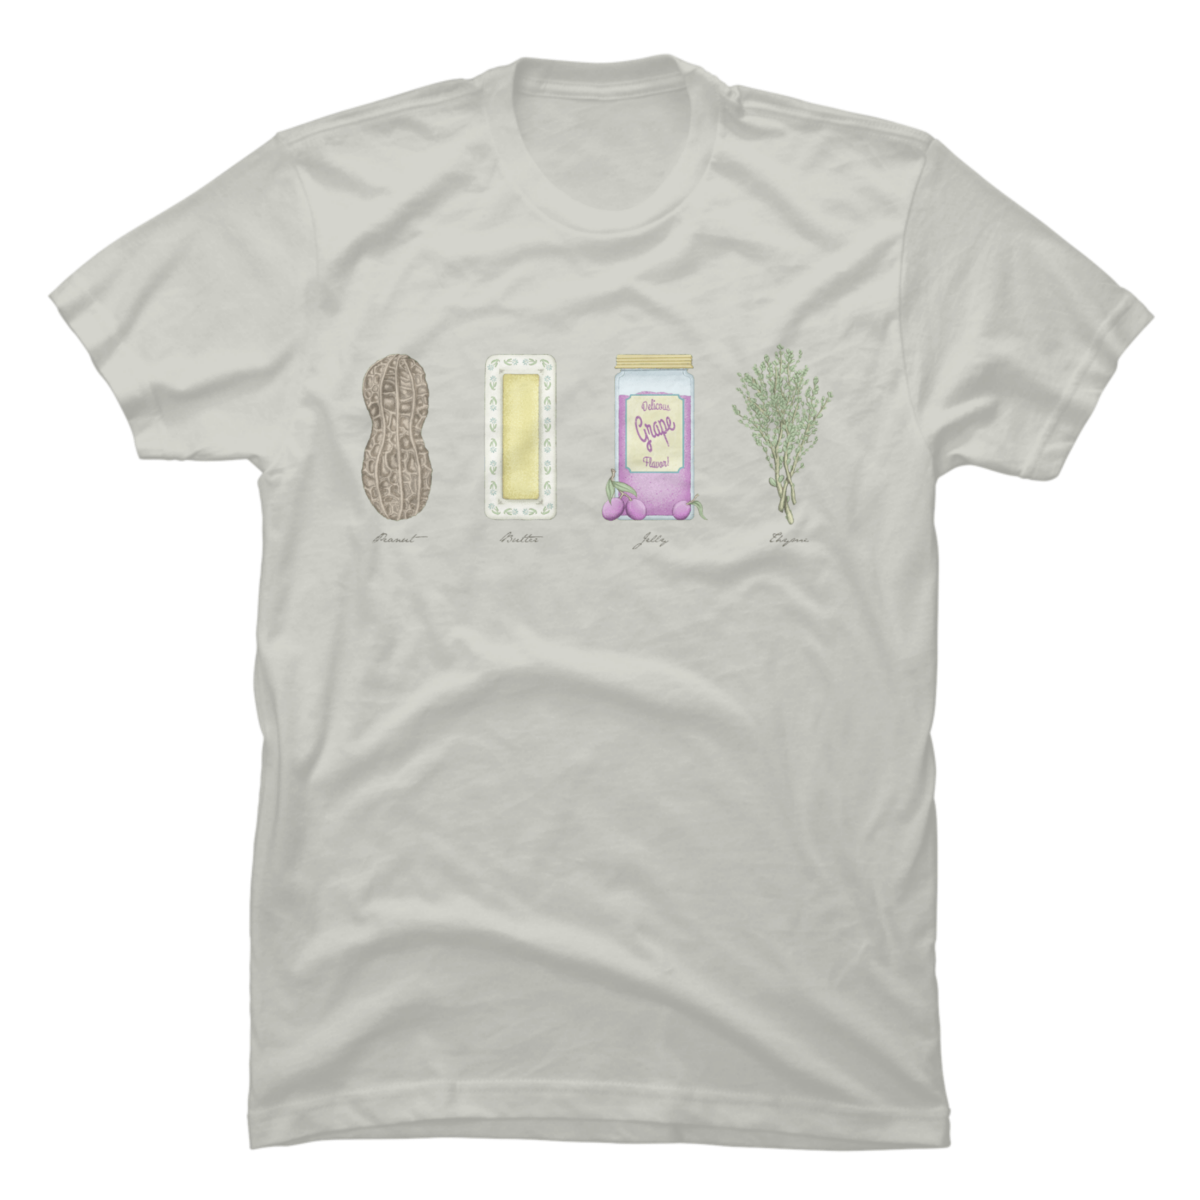 peanut butter and jelly tee shirts